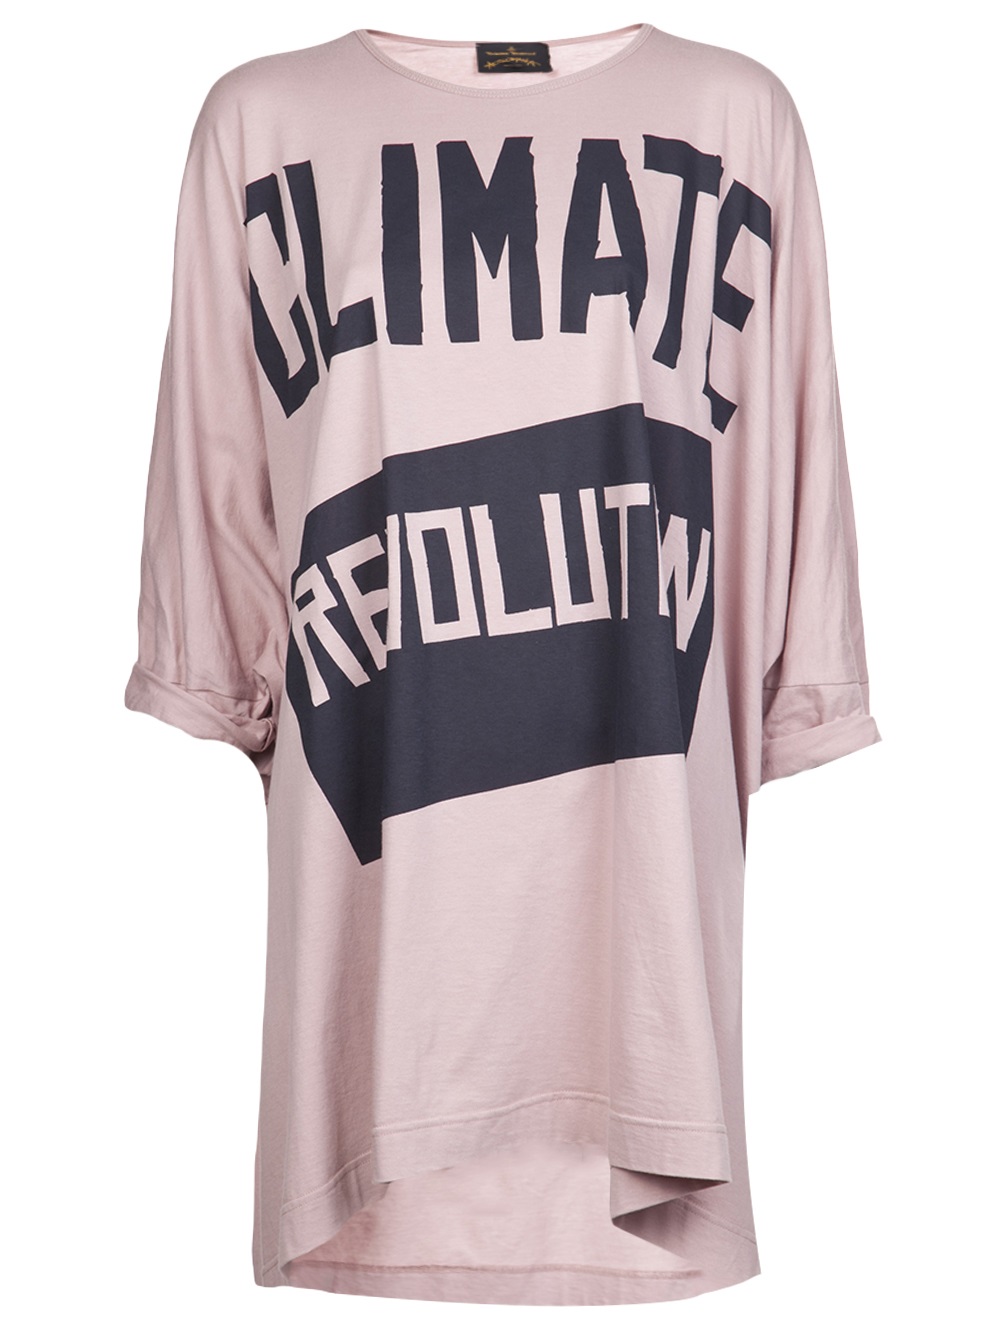 Vivienne Westwood Anglomania Climate Revolution Elephant Tshirt in 